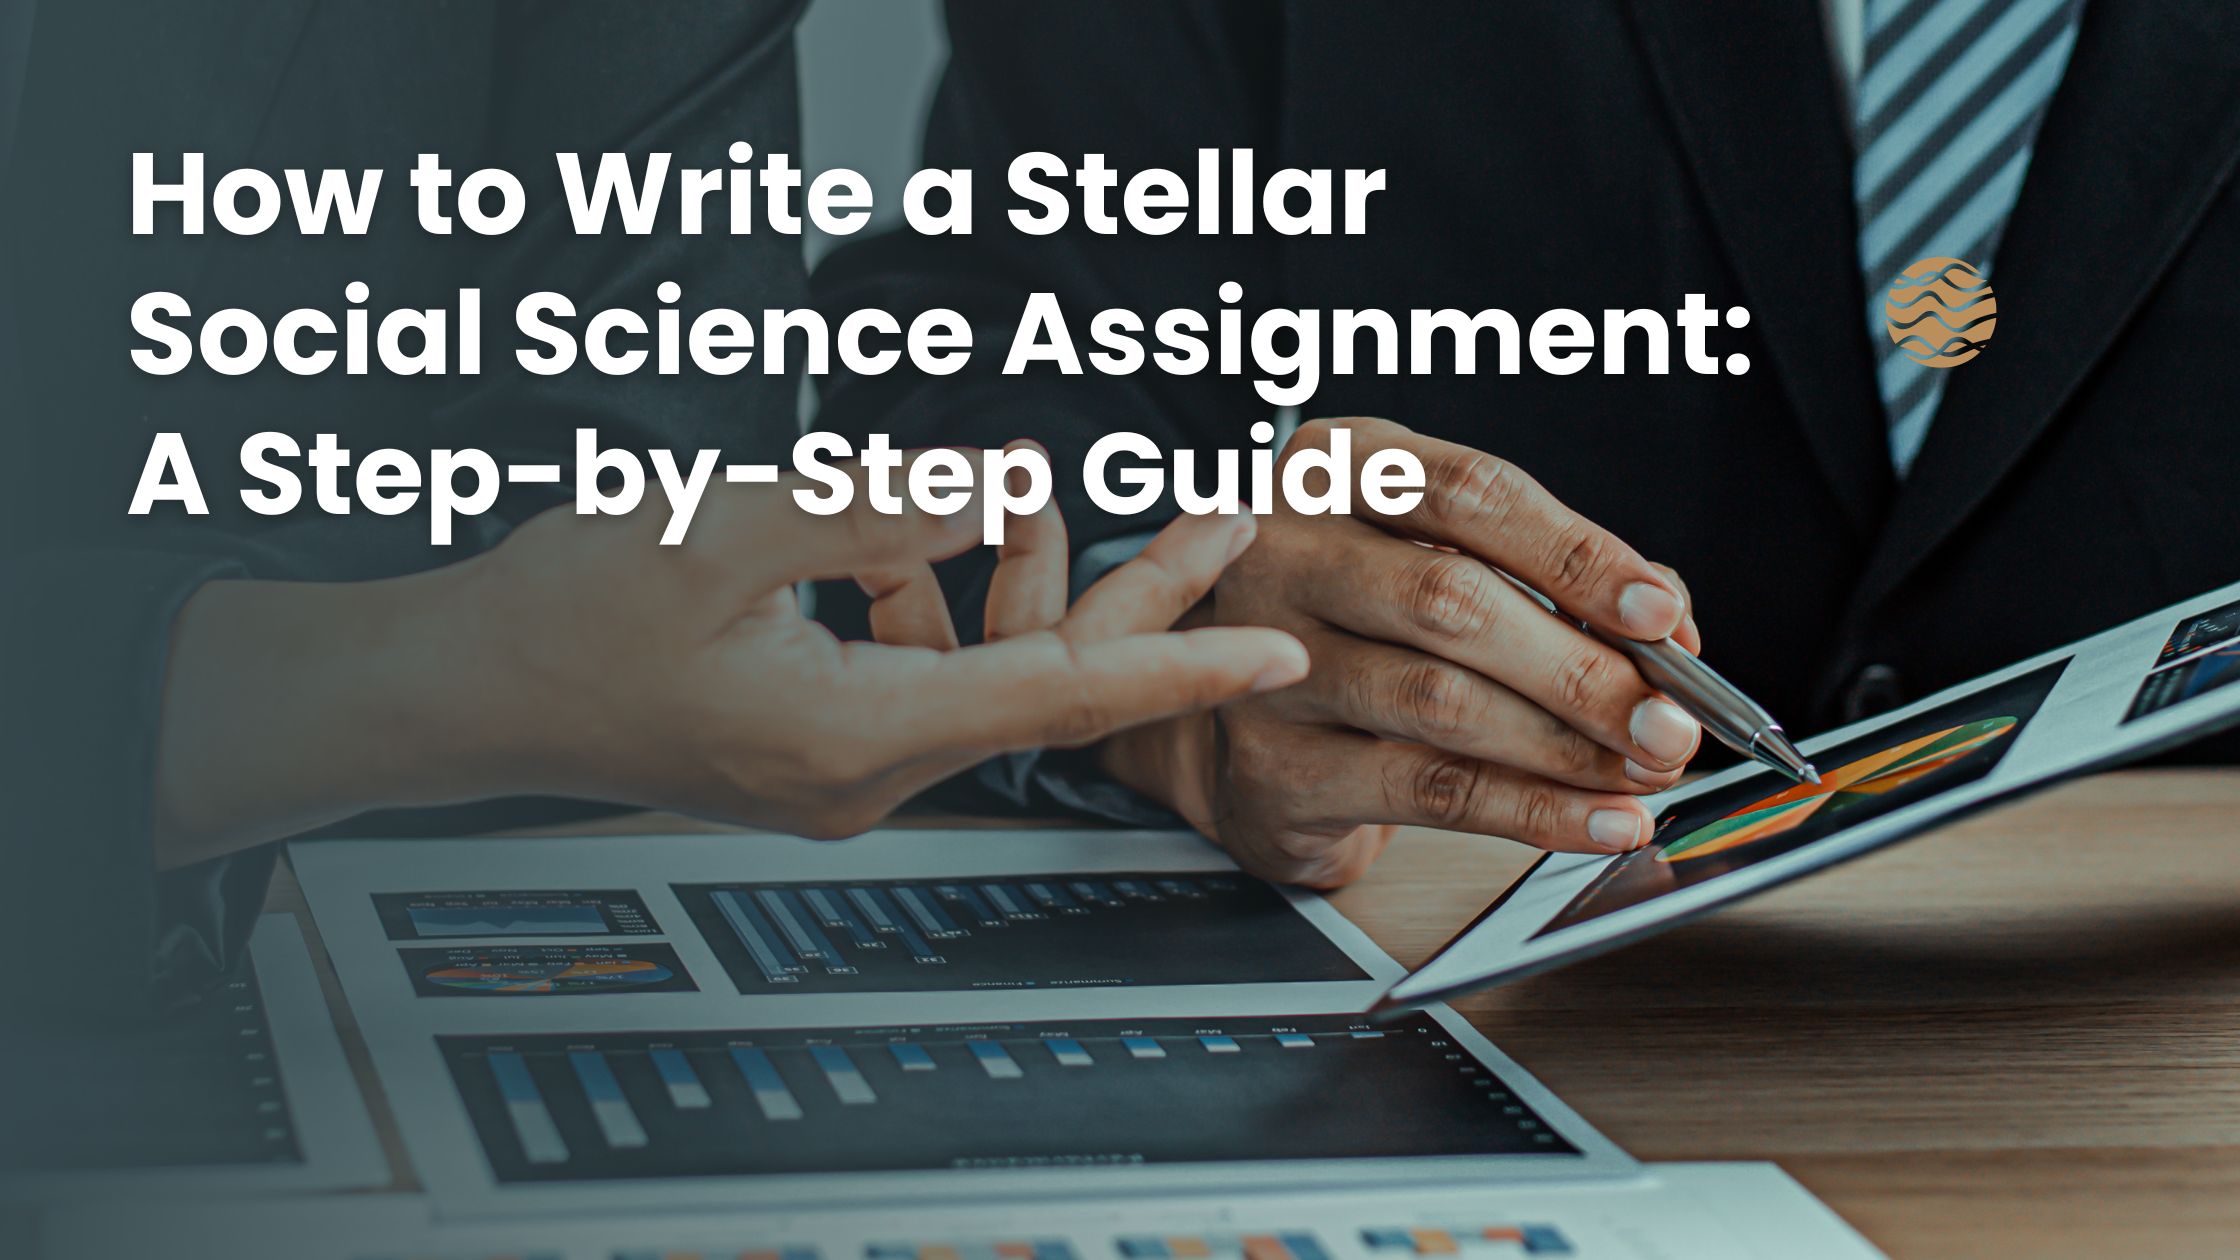 How to Write a Stellar Social Science Assignment